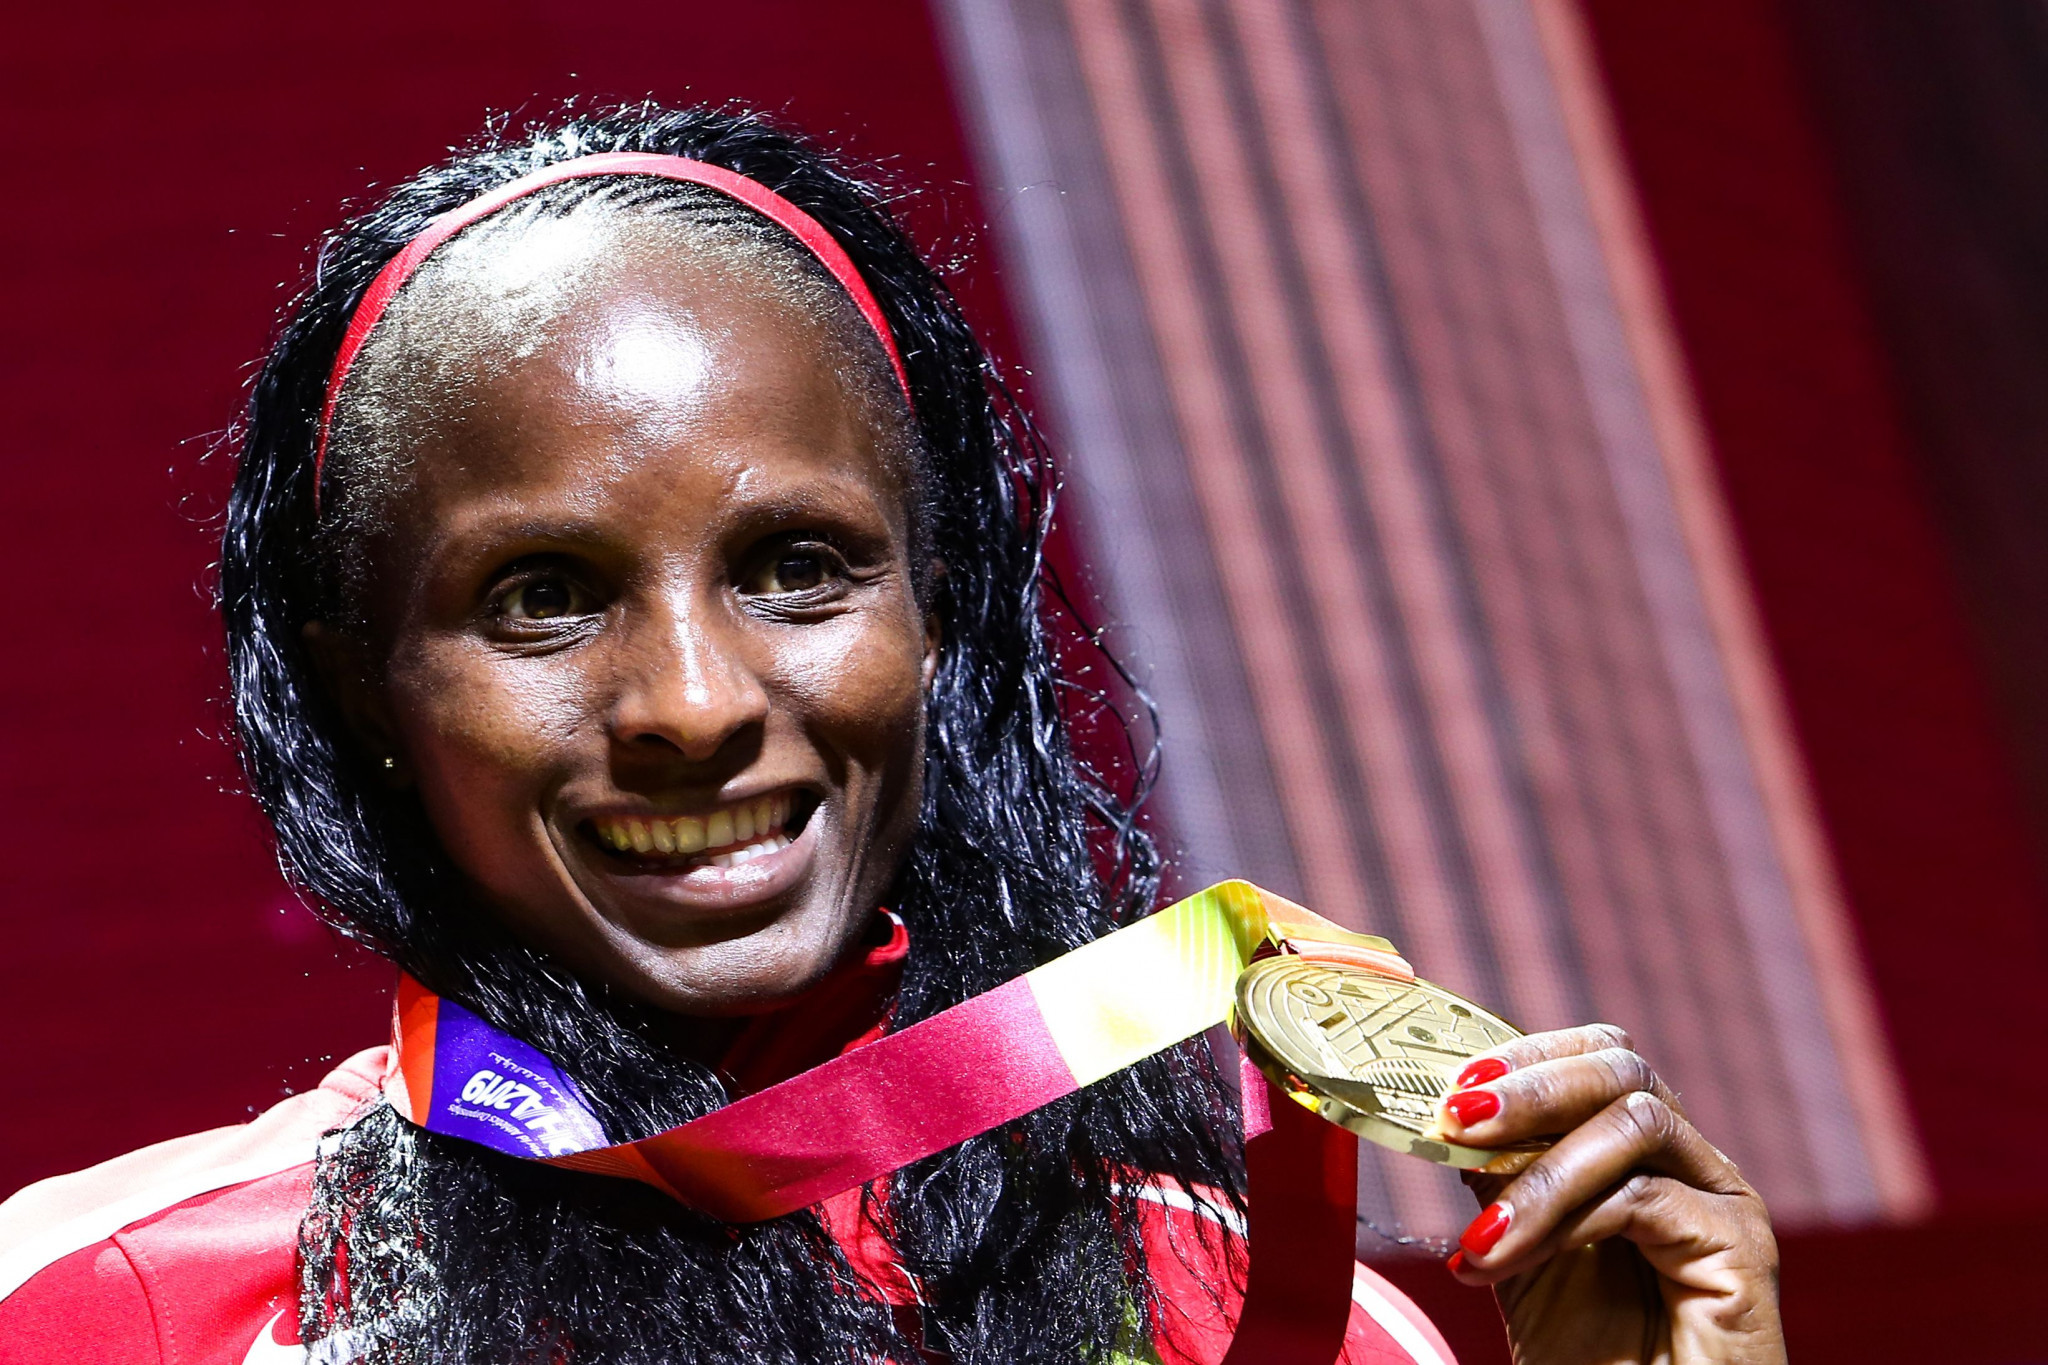 Kenya's world cross country champion Hellen Obiri will seek a second consecutive victory in the World Athletics Cross Country Permit Series in Spain tomorrow ©Getty Images